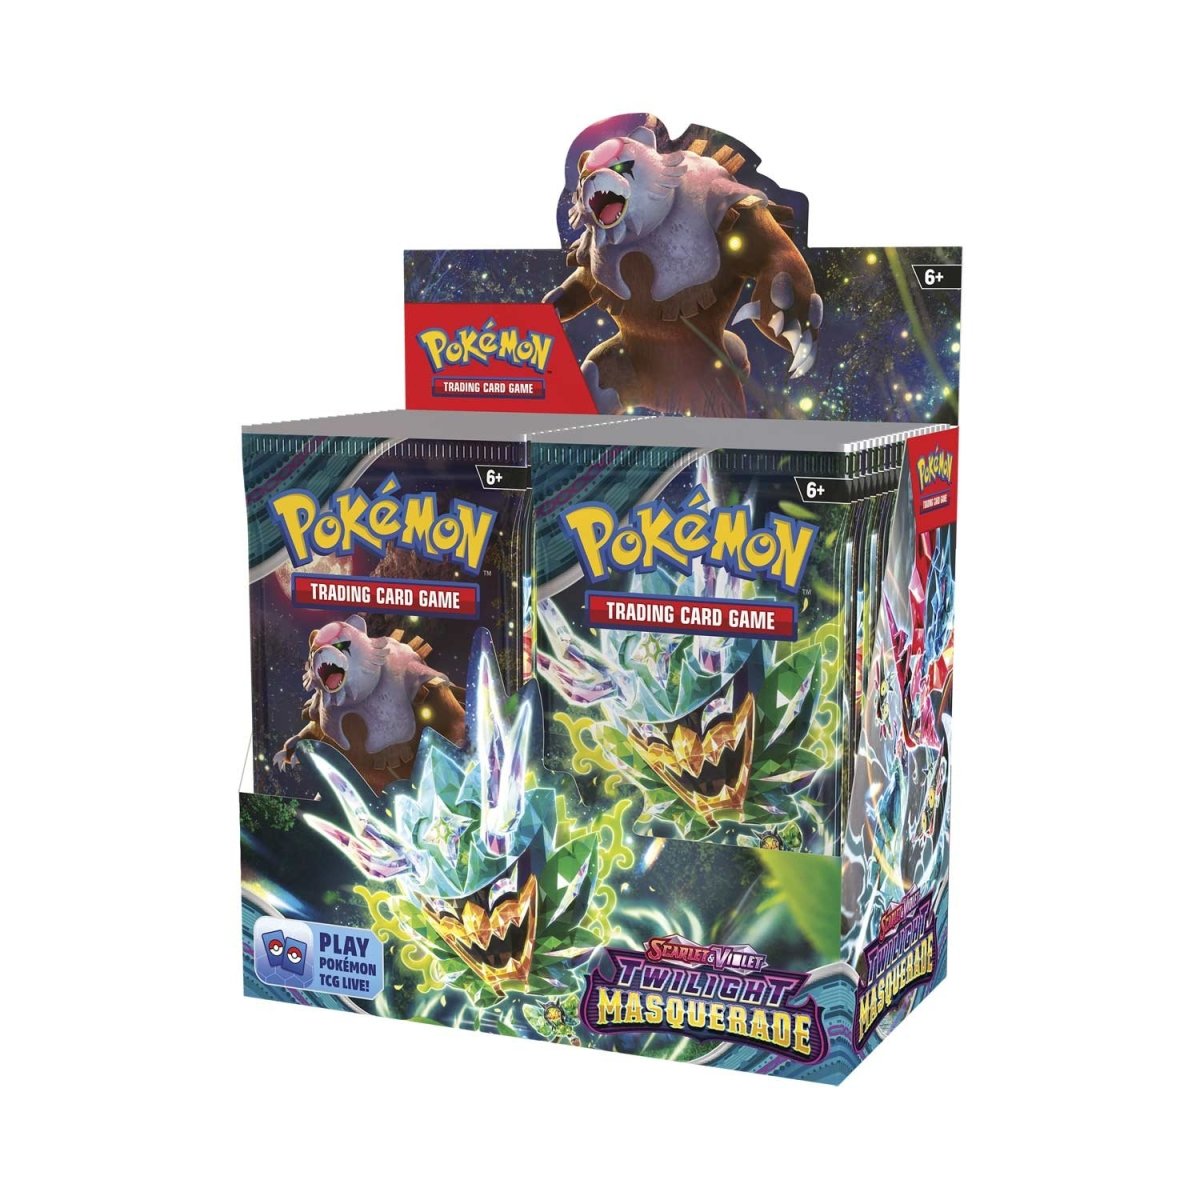 POKEMON SCARLET & VIOLET: TWILIGHT MASQUERADE BOOSTER BOX (that’s 36 packs) – Shipping 5/20/24